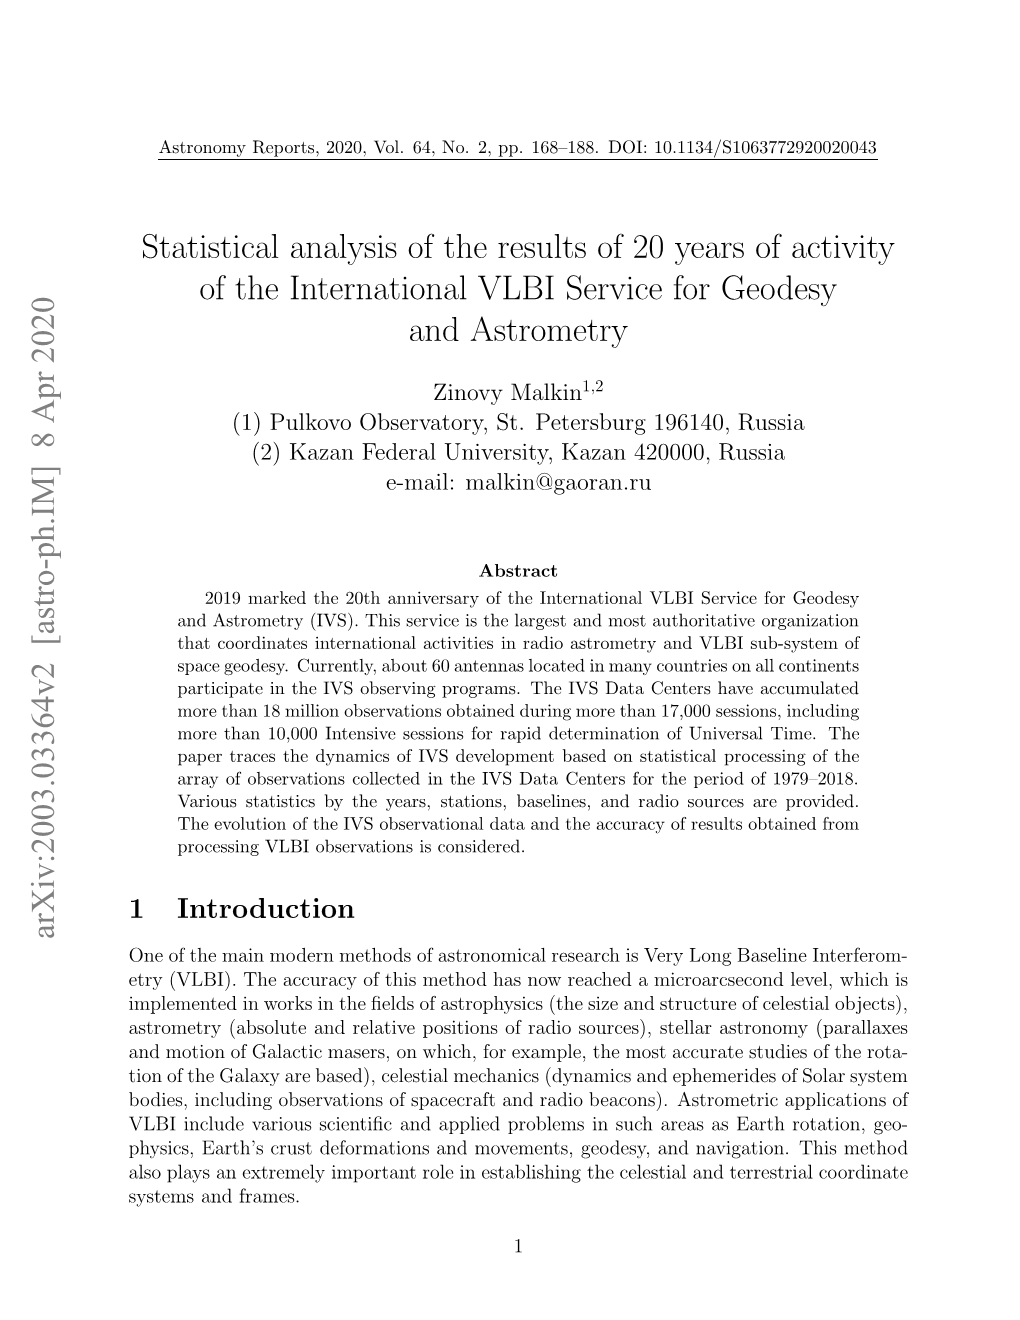 Statistical Analysis of the Results of 20 Years of Activity of the International VLBI Service for Geodesy and Astrometry